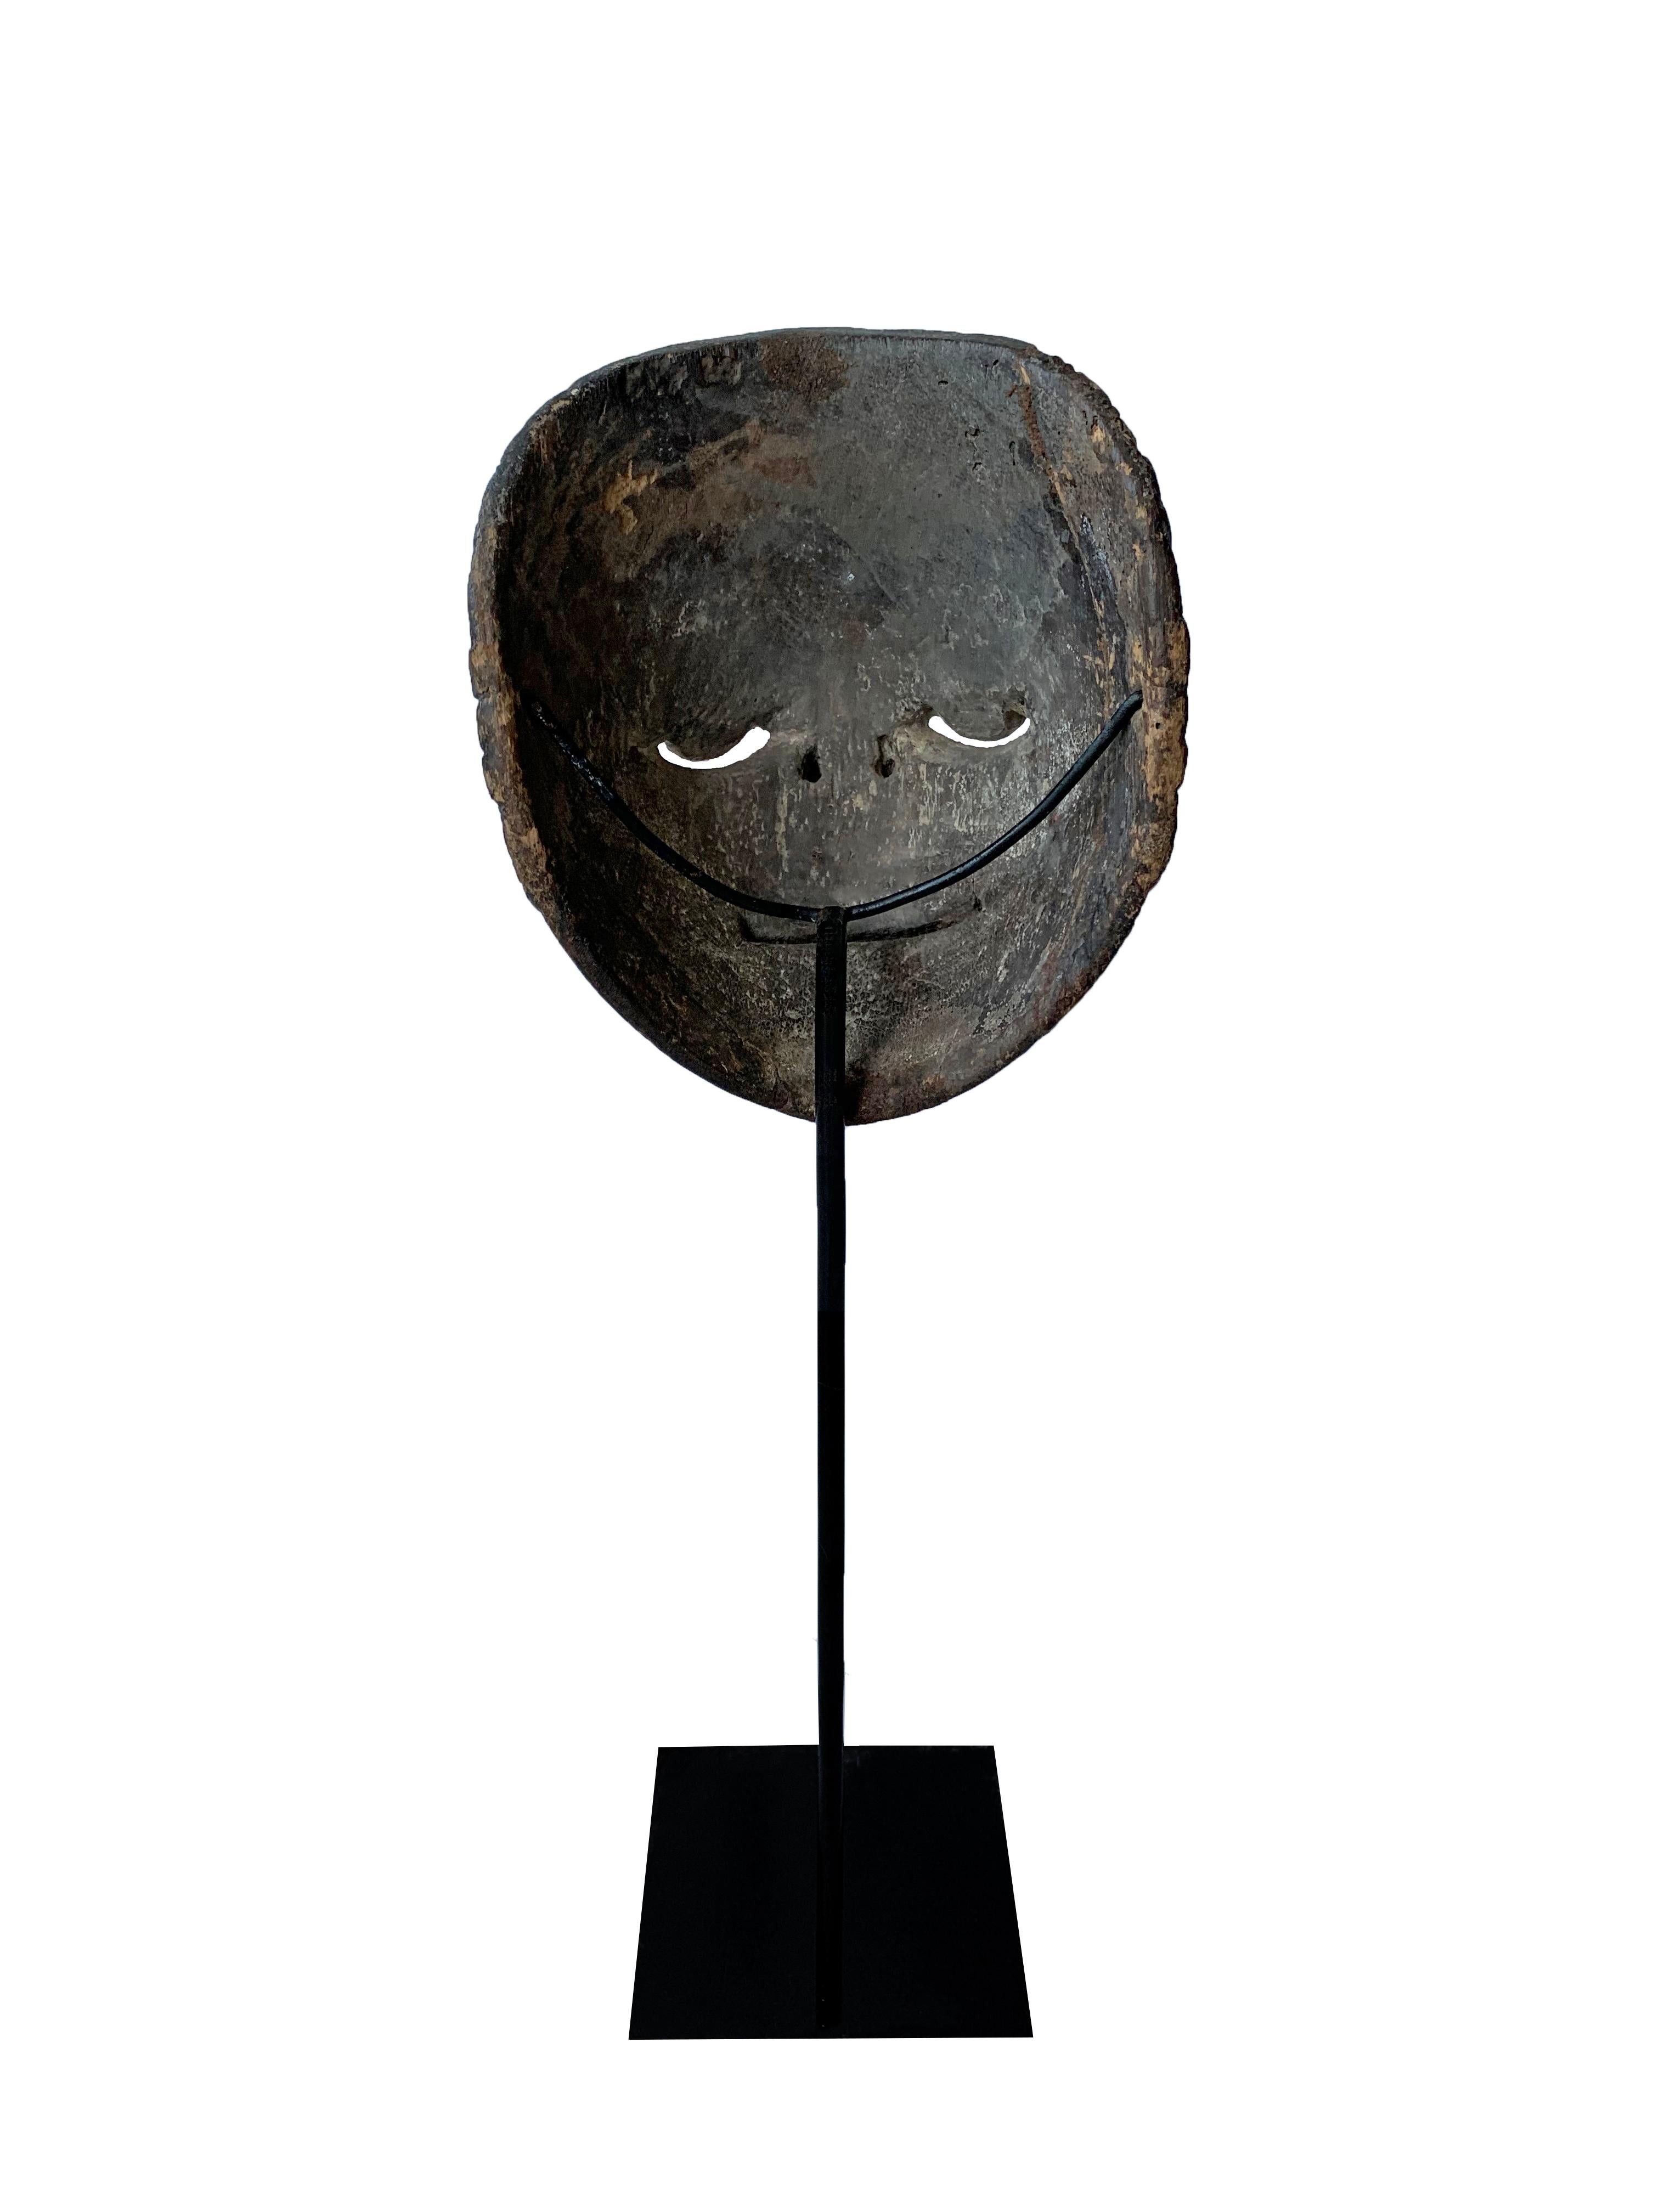 indonesian wooden mask and sculpture